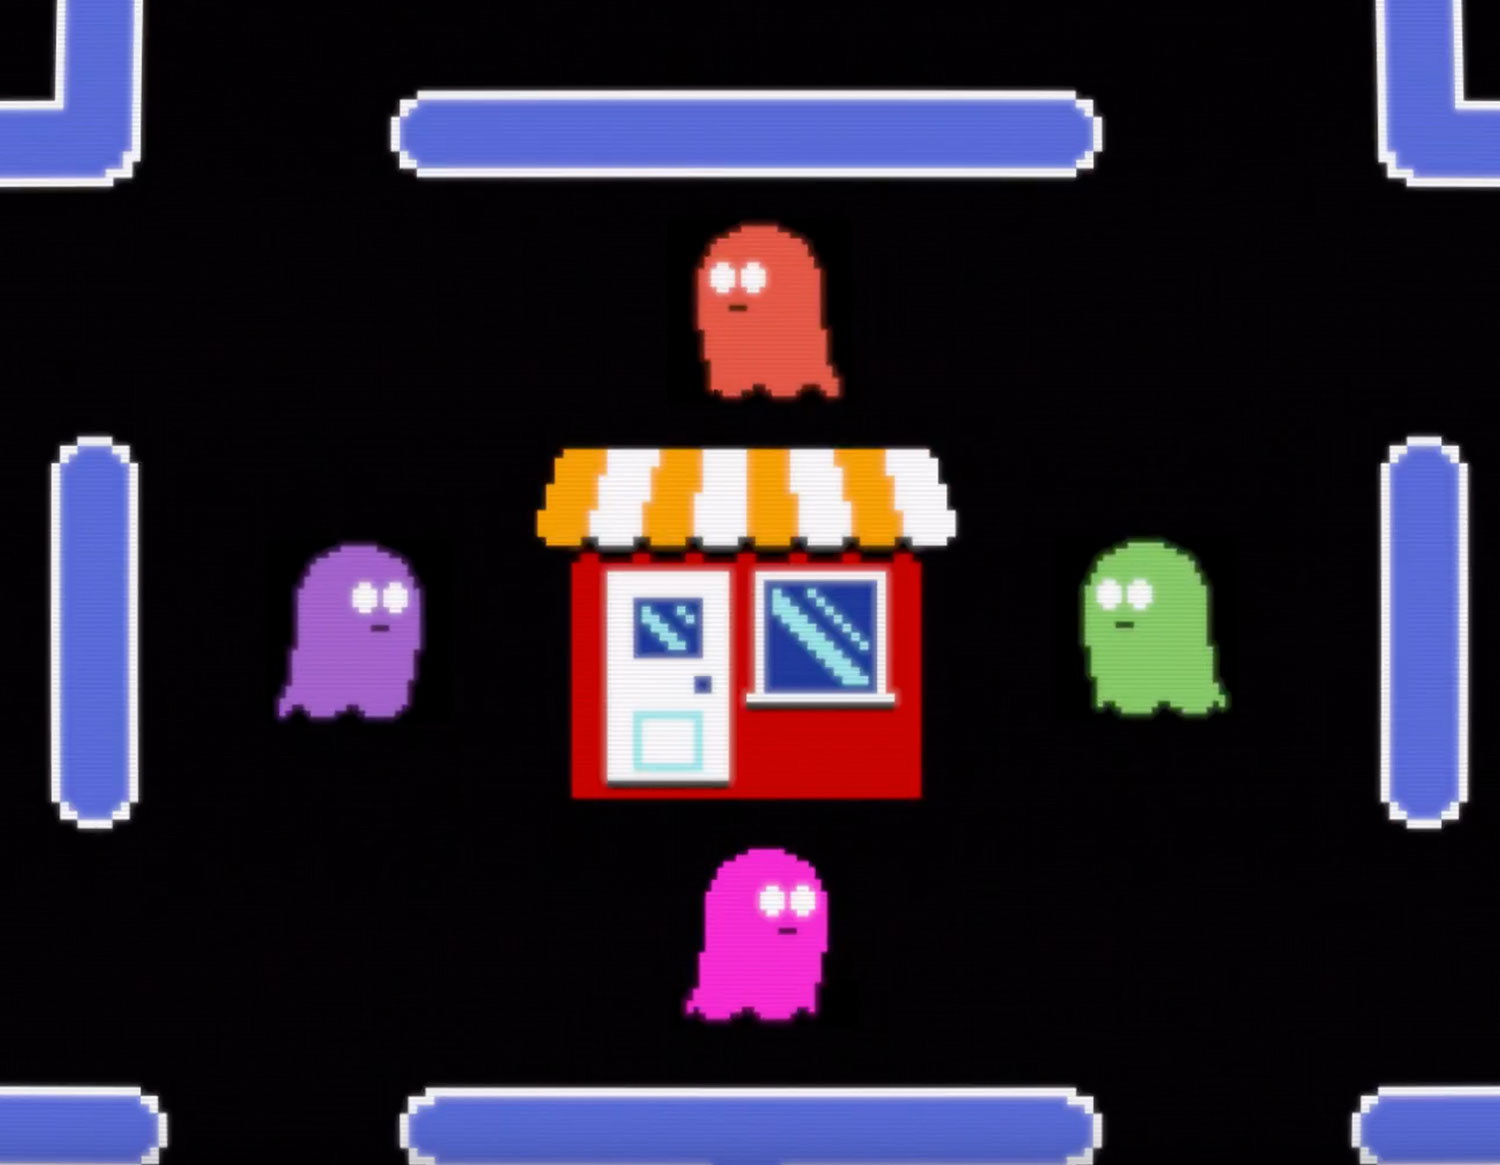 pac man style video game with pixelated shop in the middle